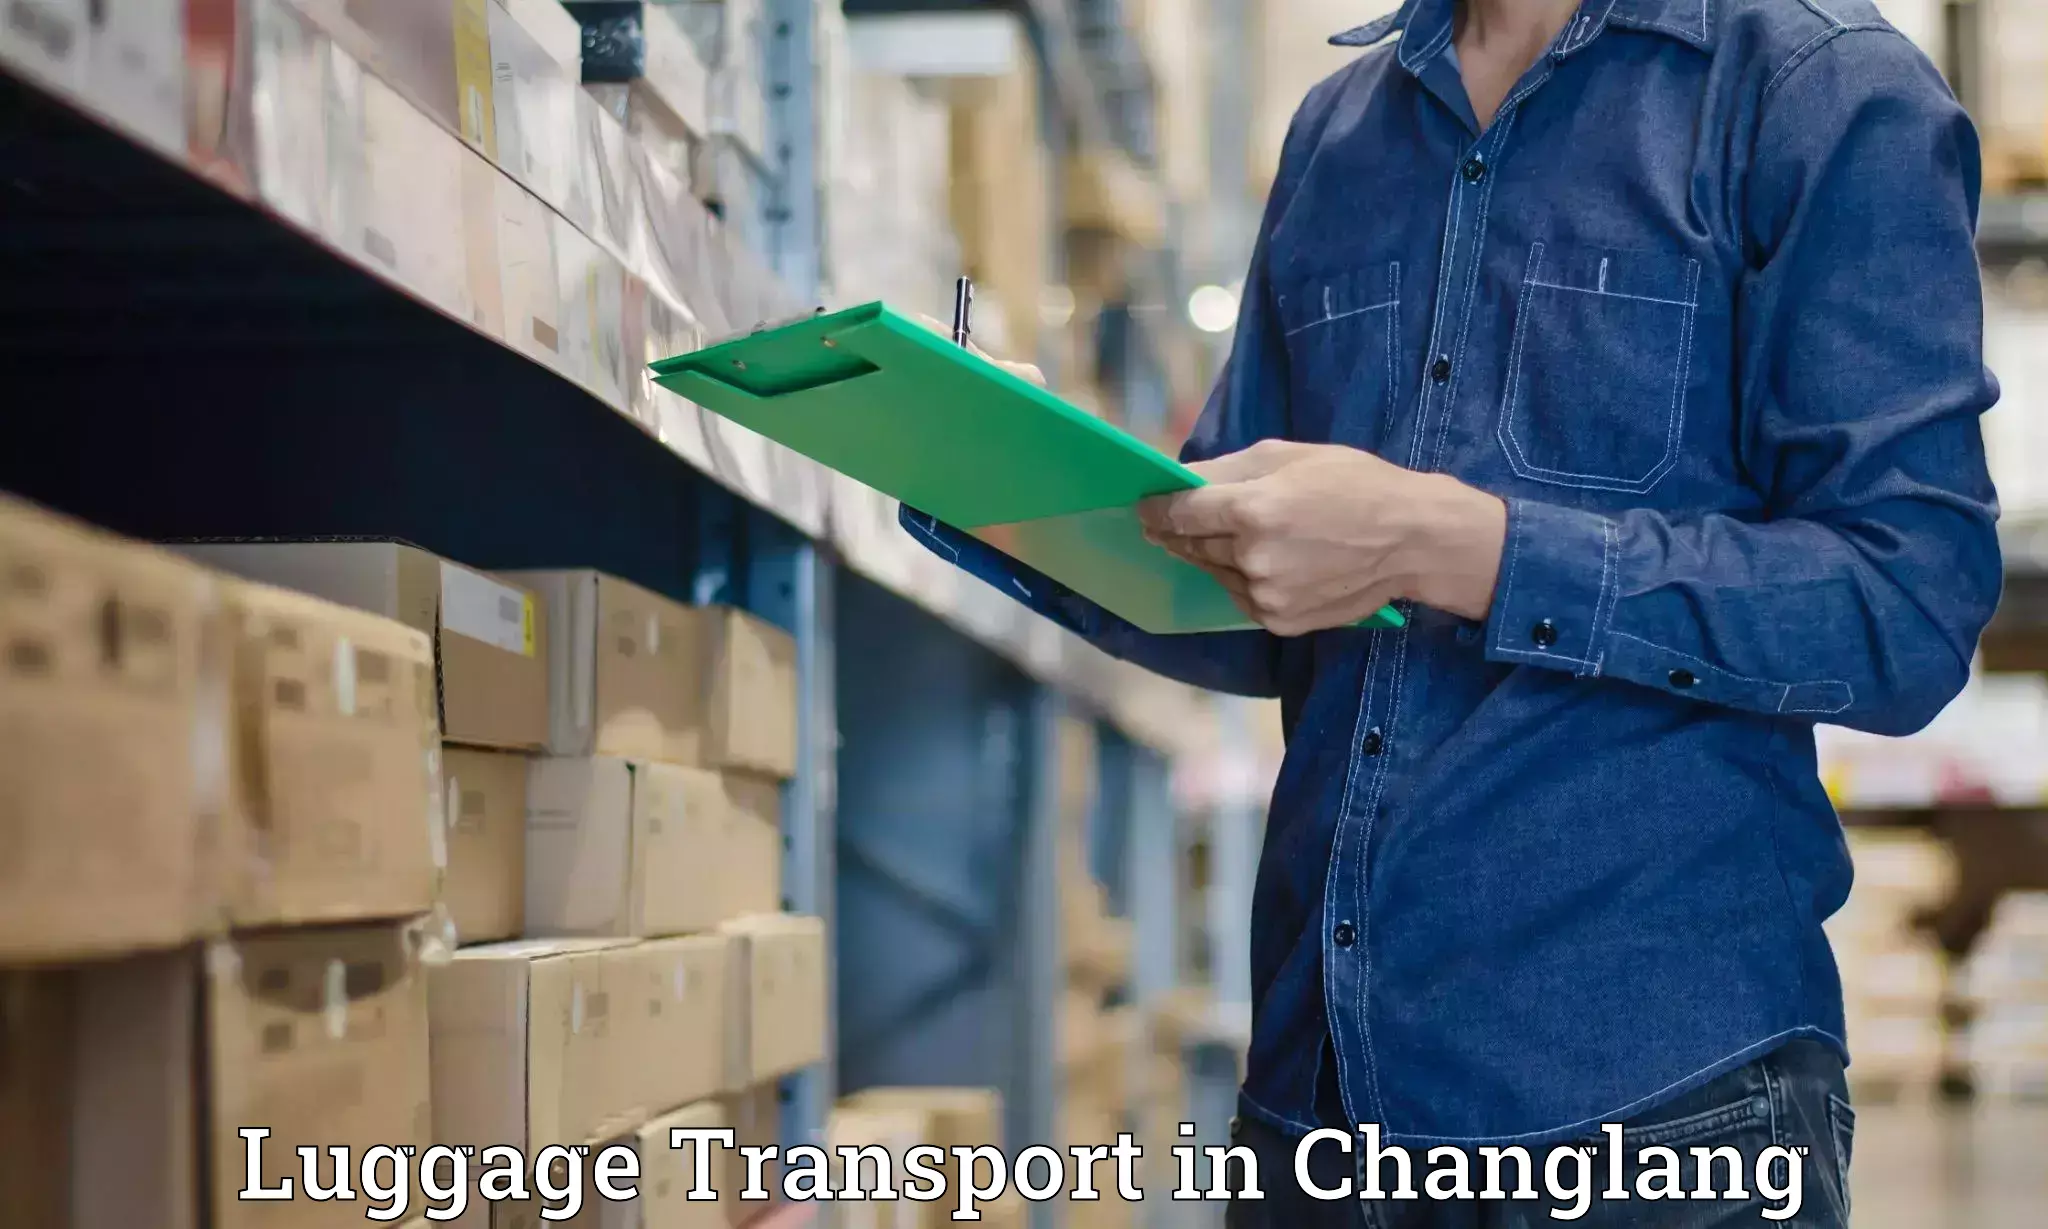 Luggage shipping efficiency in Changlang